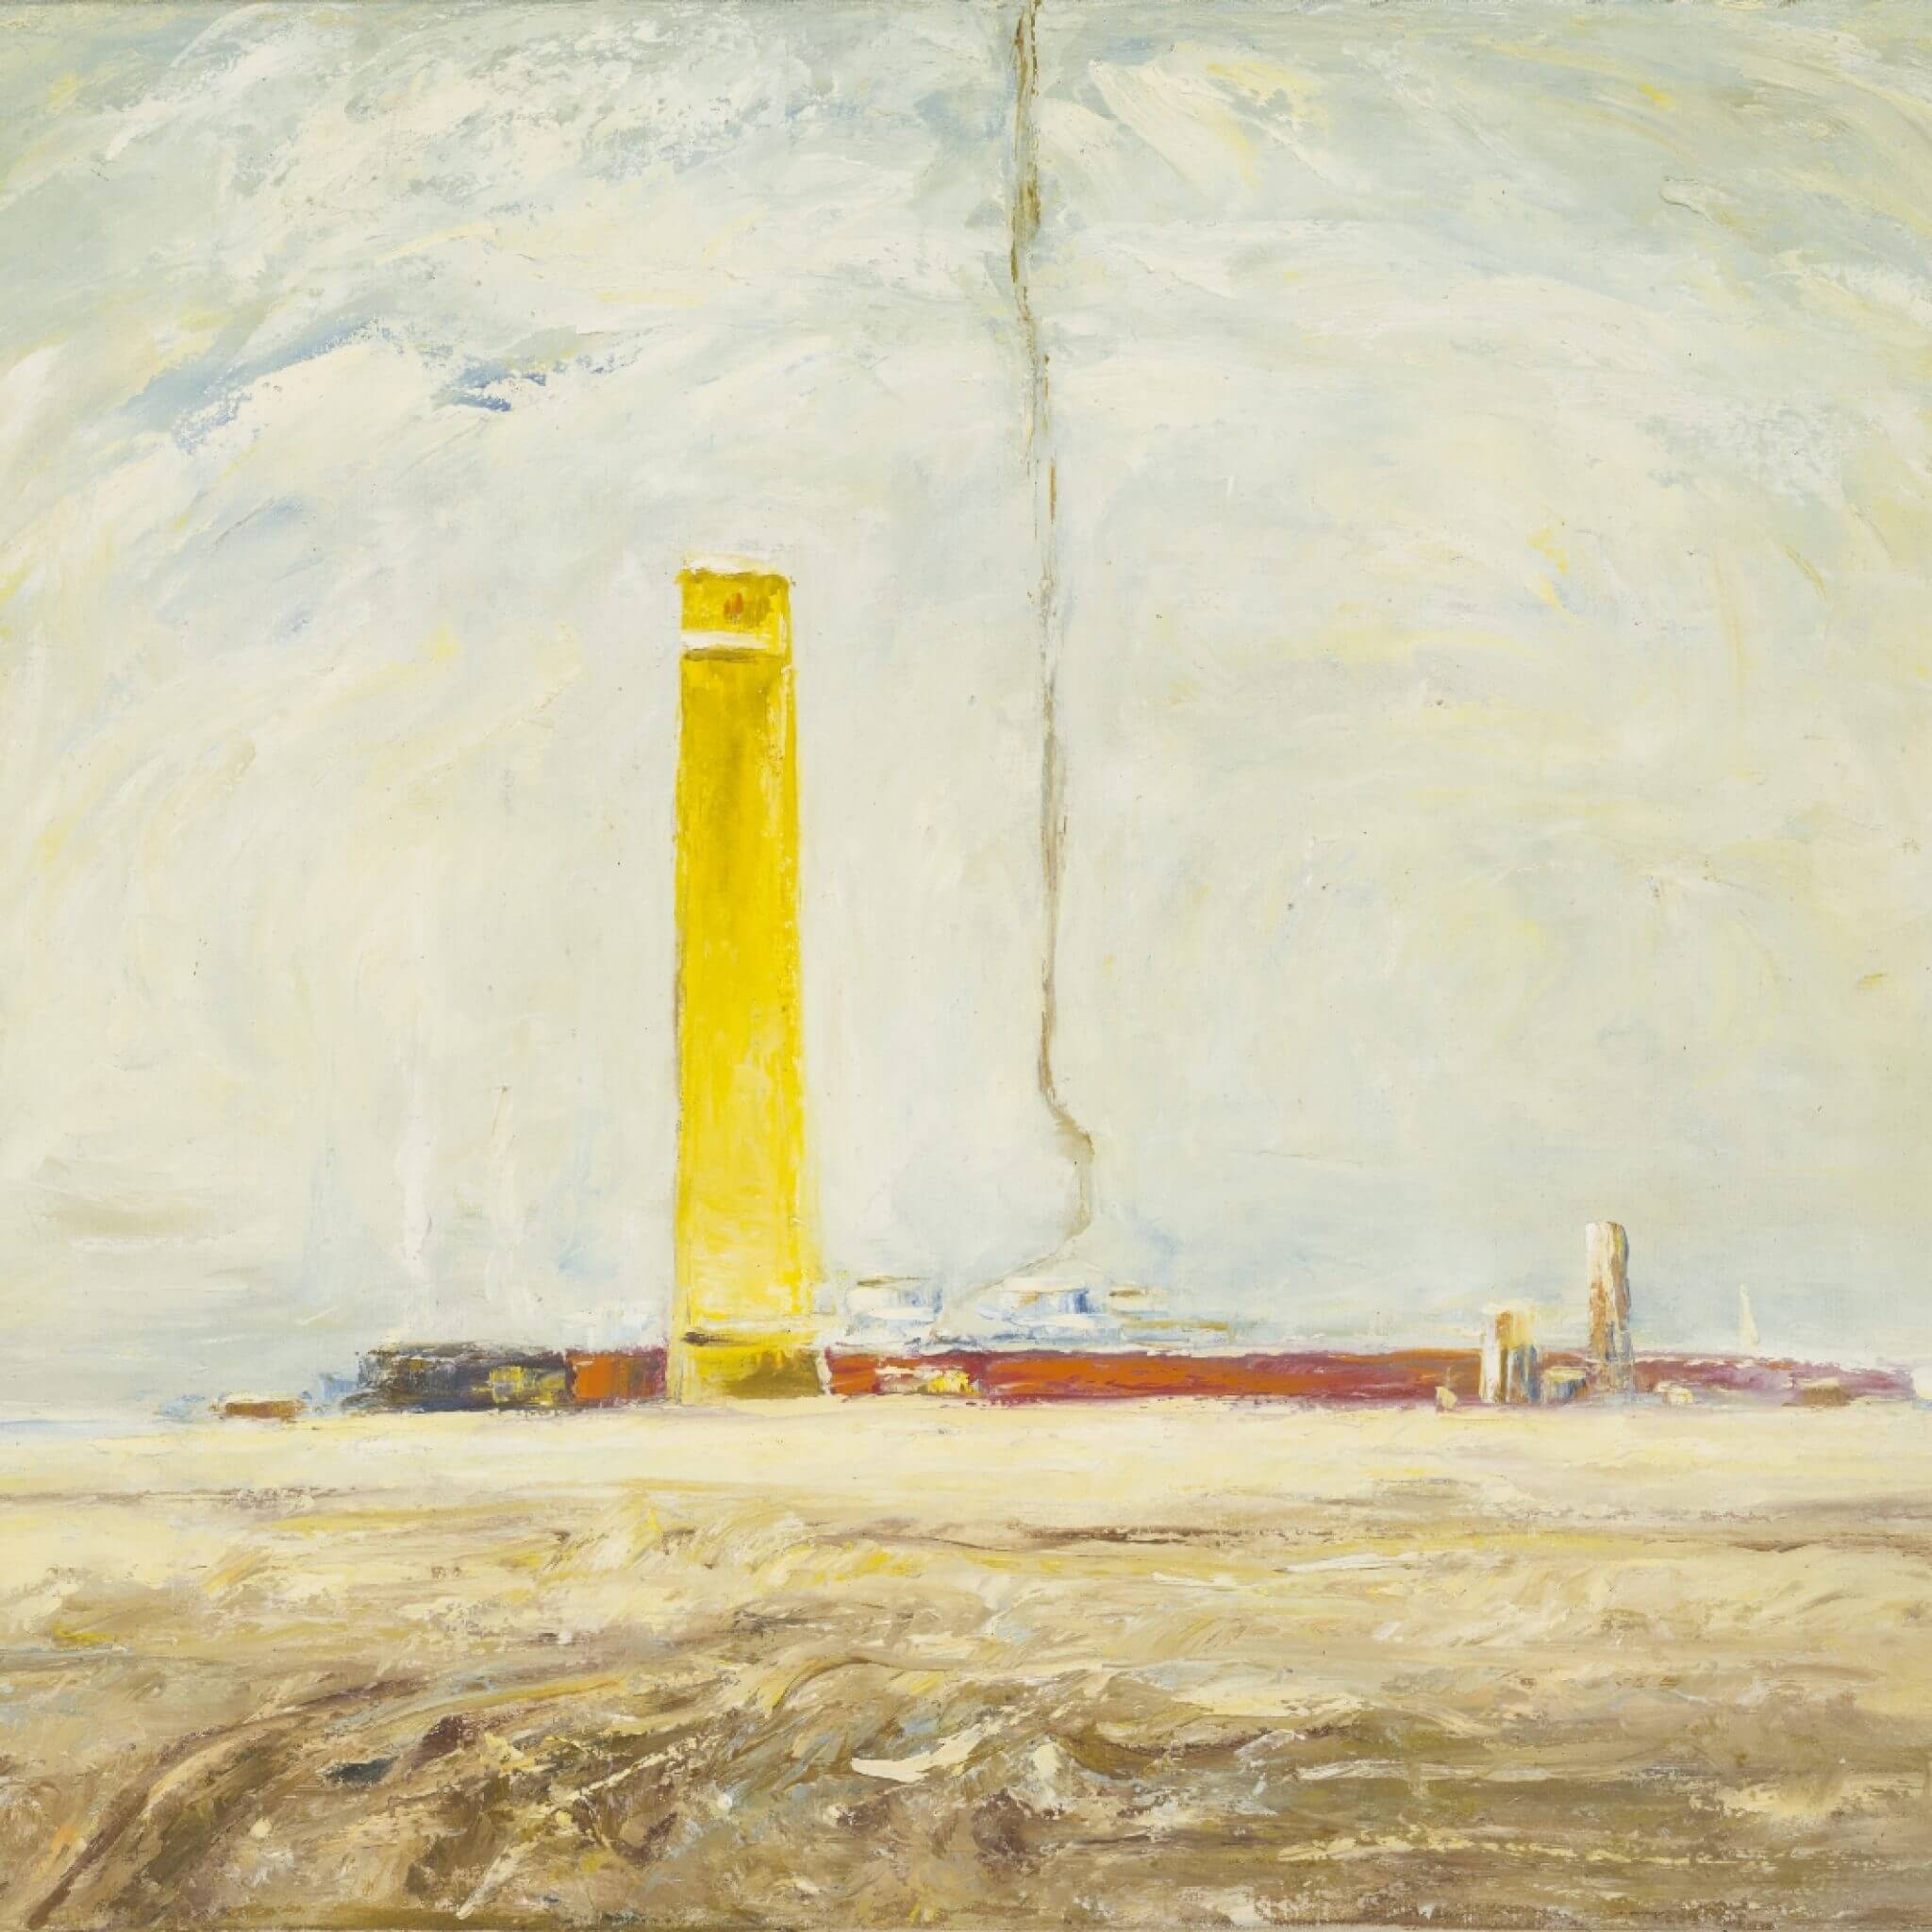 Oil painting of a prairie and grain silo and a train with smoke rising up in the sky